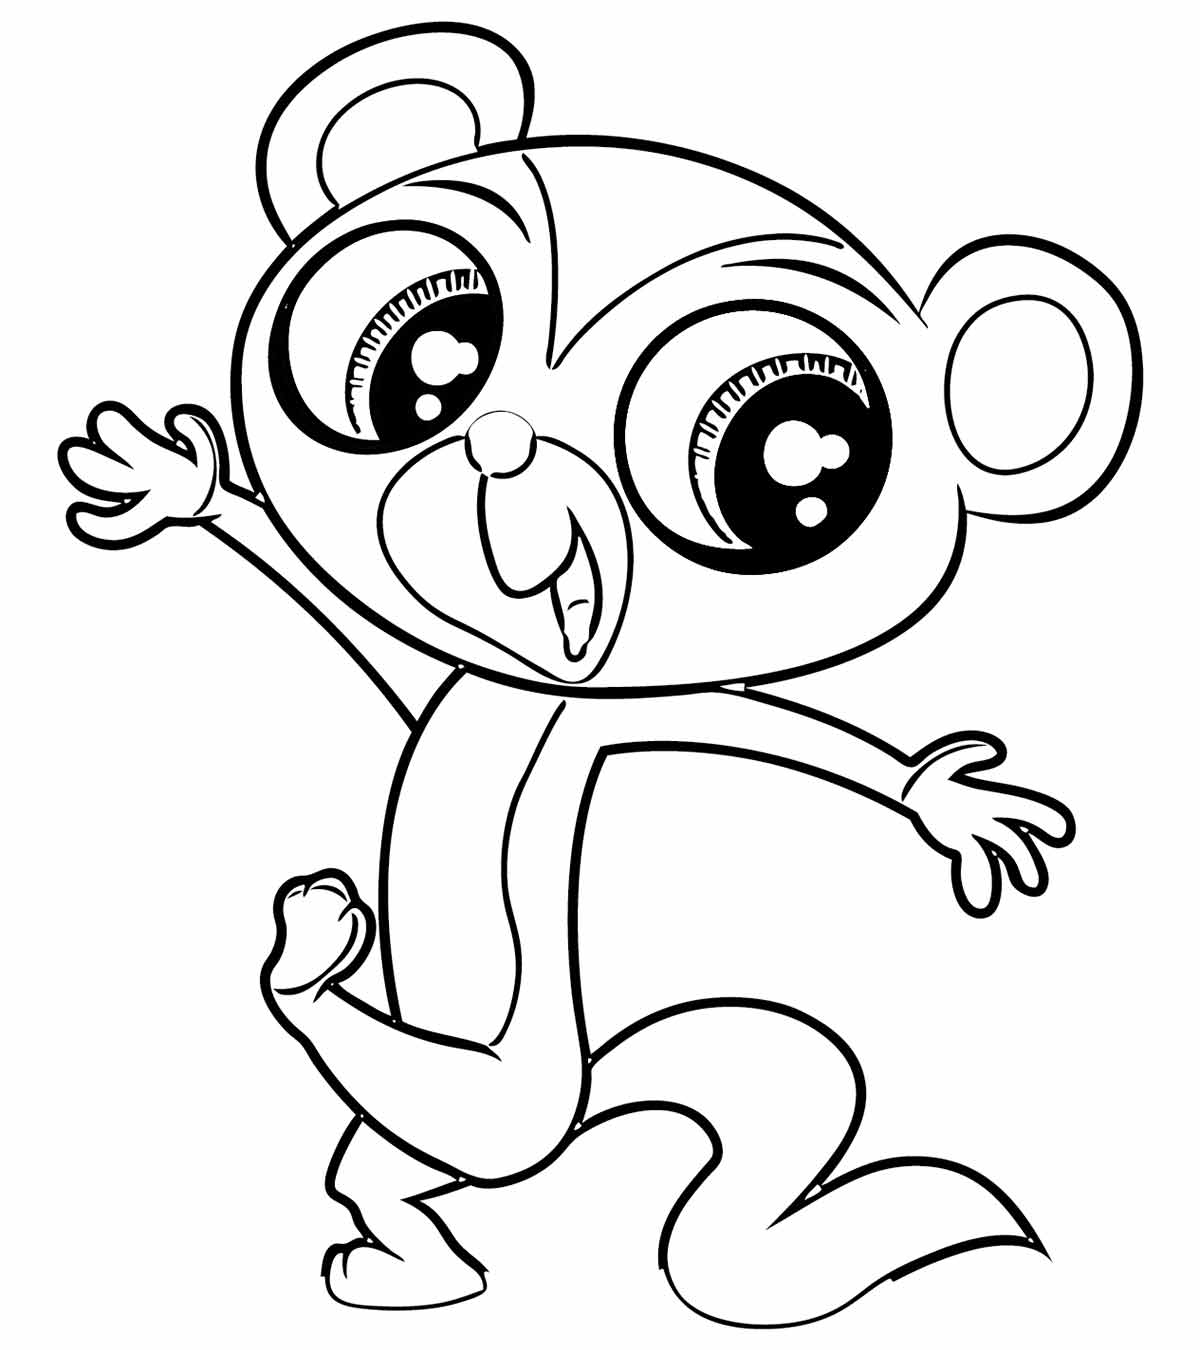 Monkey dancing in Big City Greens Coloring Page